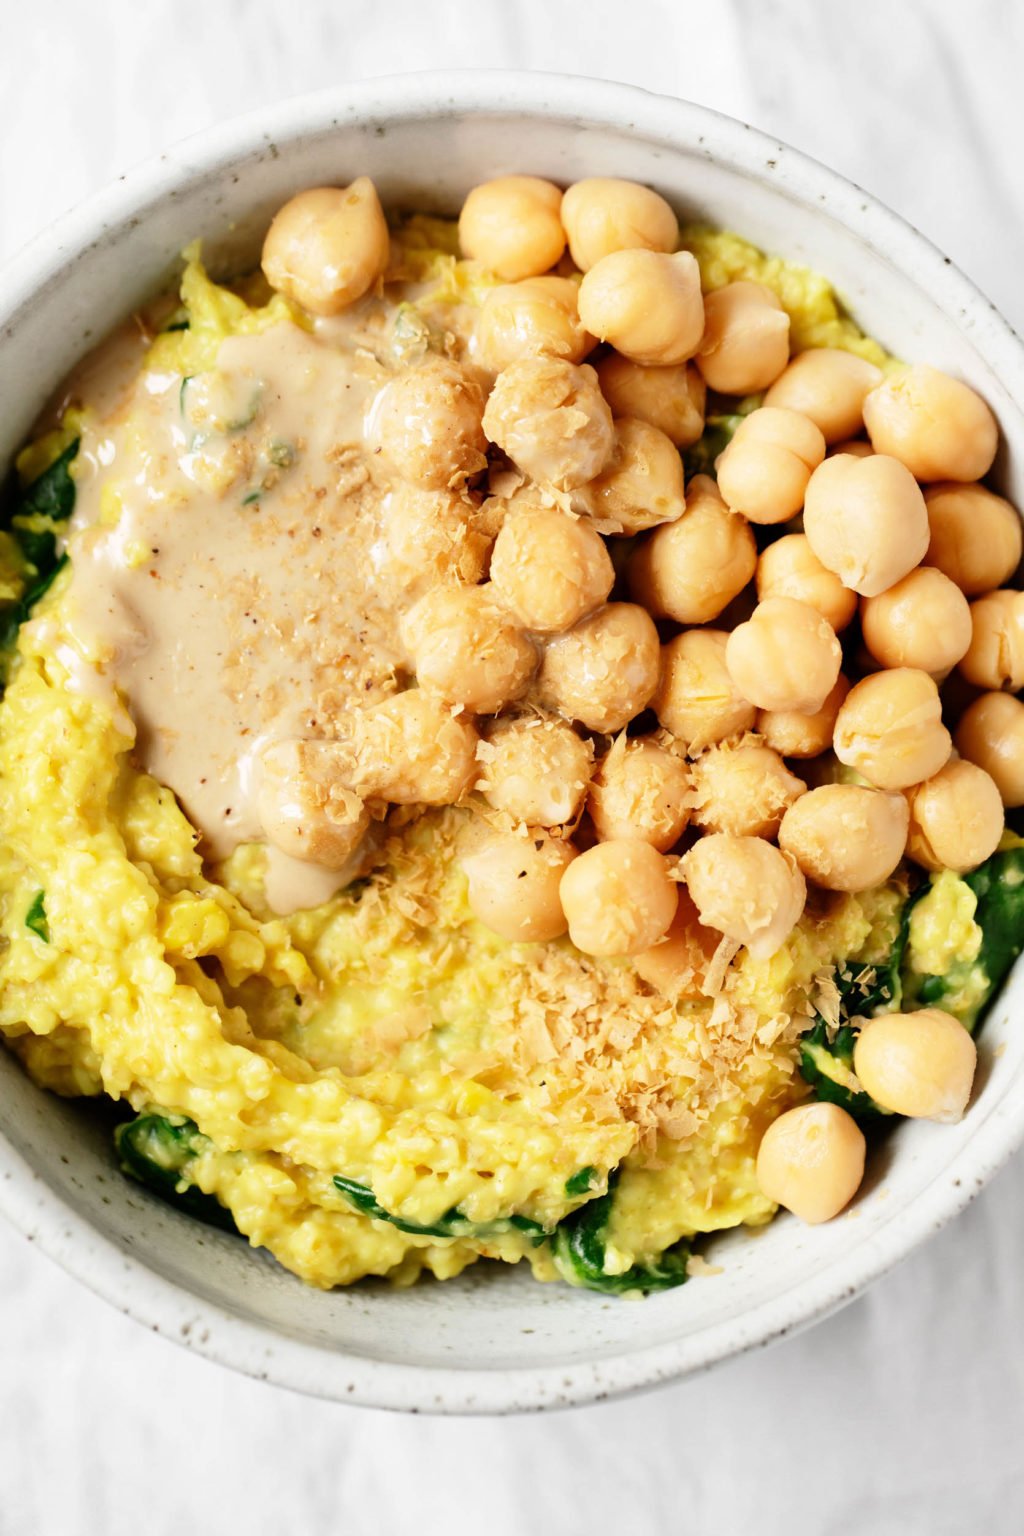 A zoomed in, overhead photograph of a vegan grain dish with legumes and spinach.